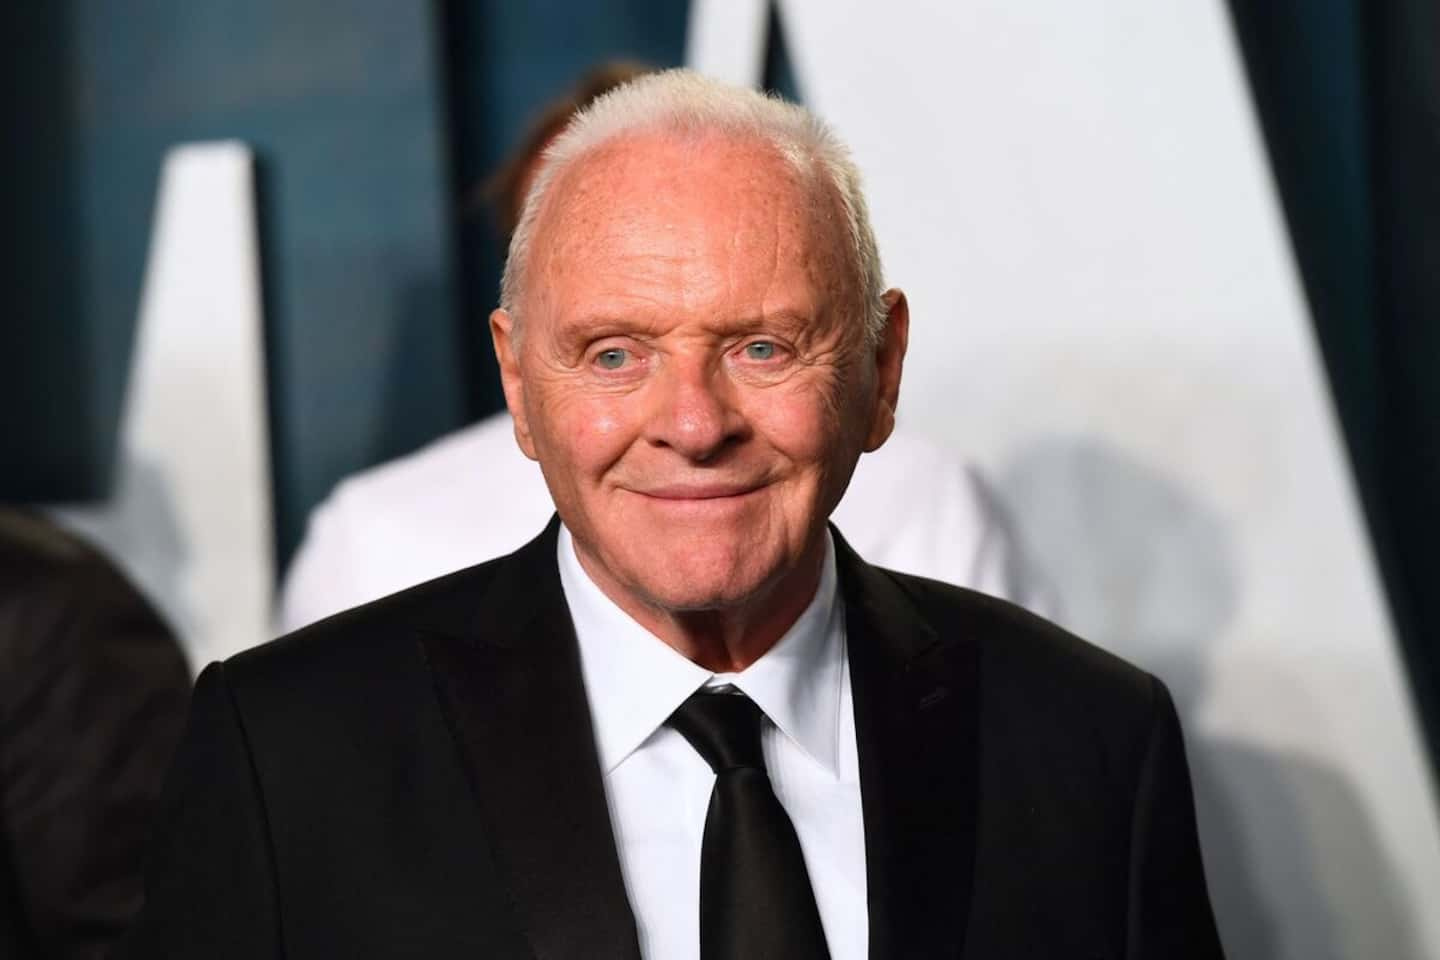 Anthony Hopkins celebrates 47 years of sobriety in powerful video